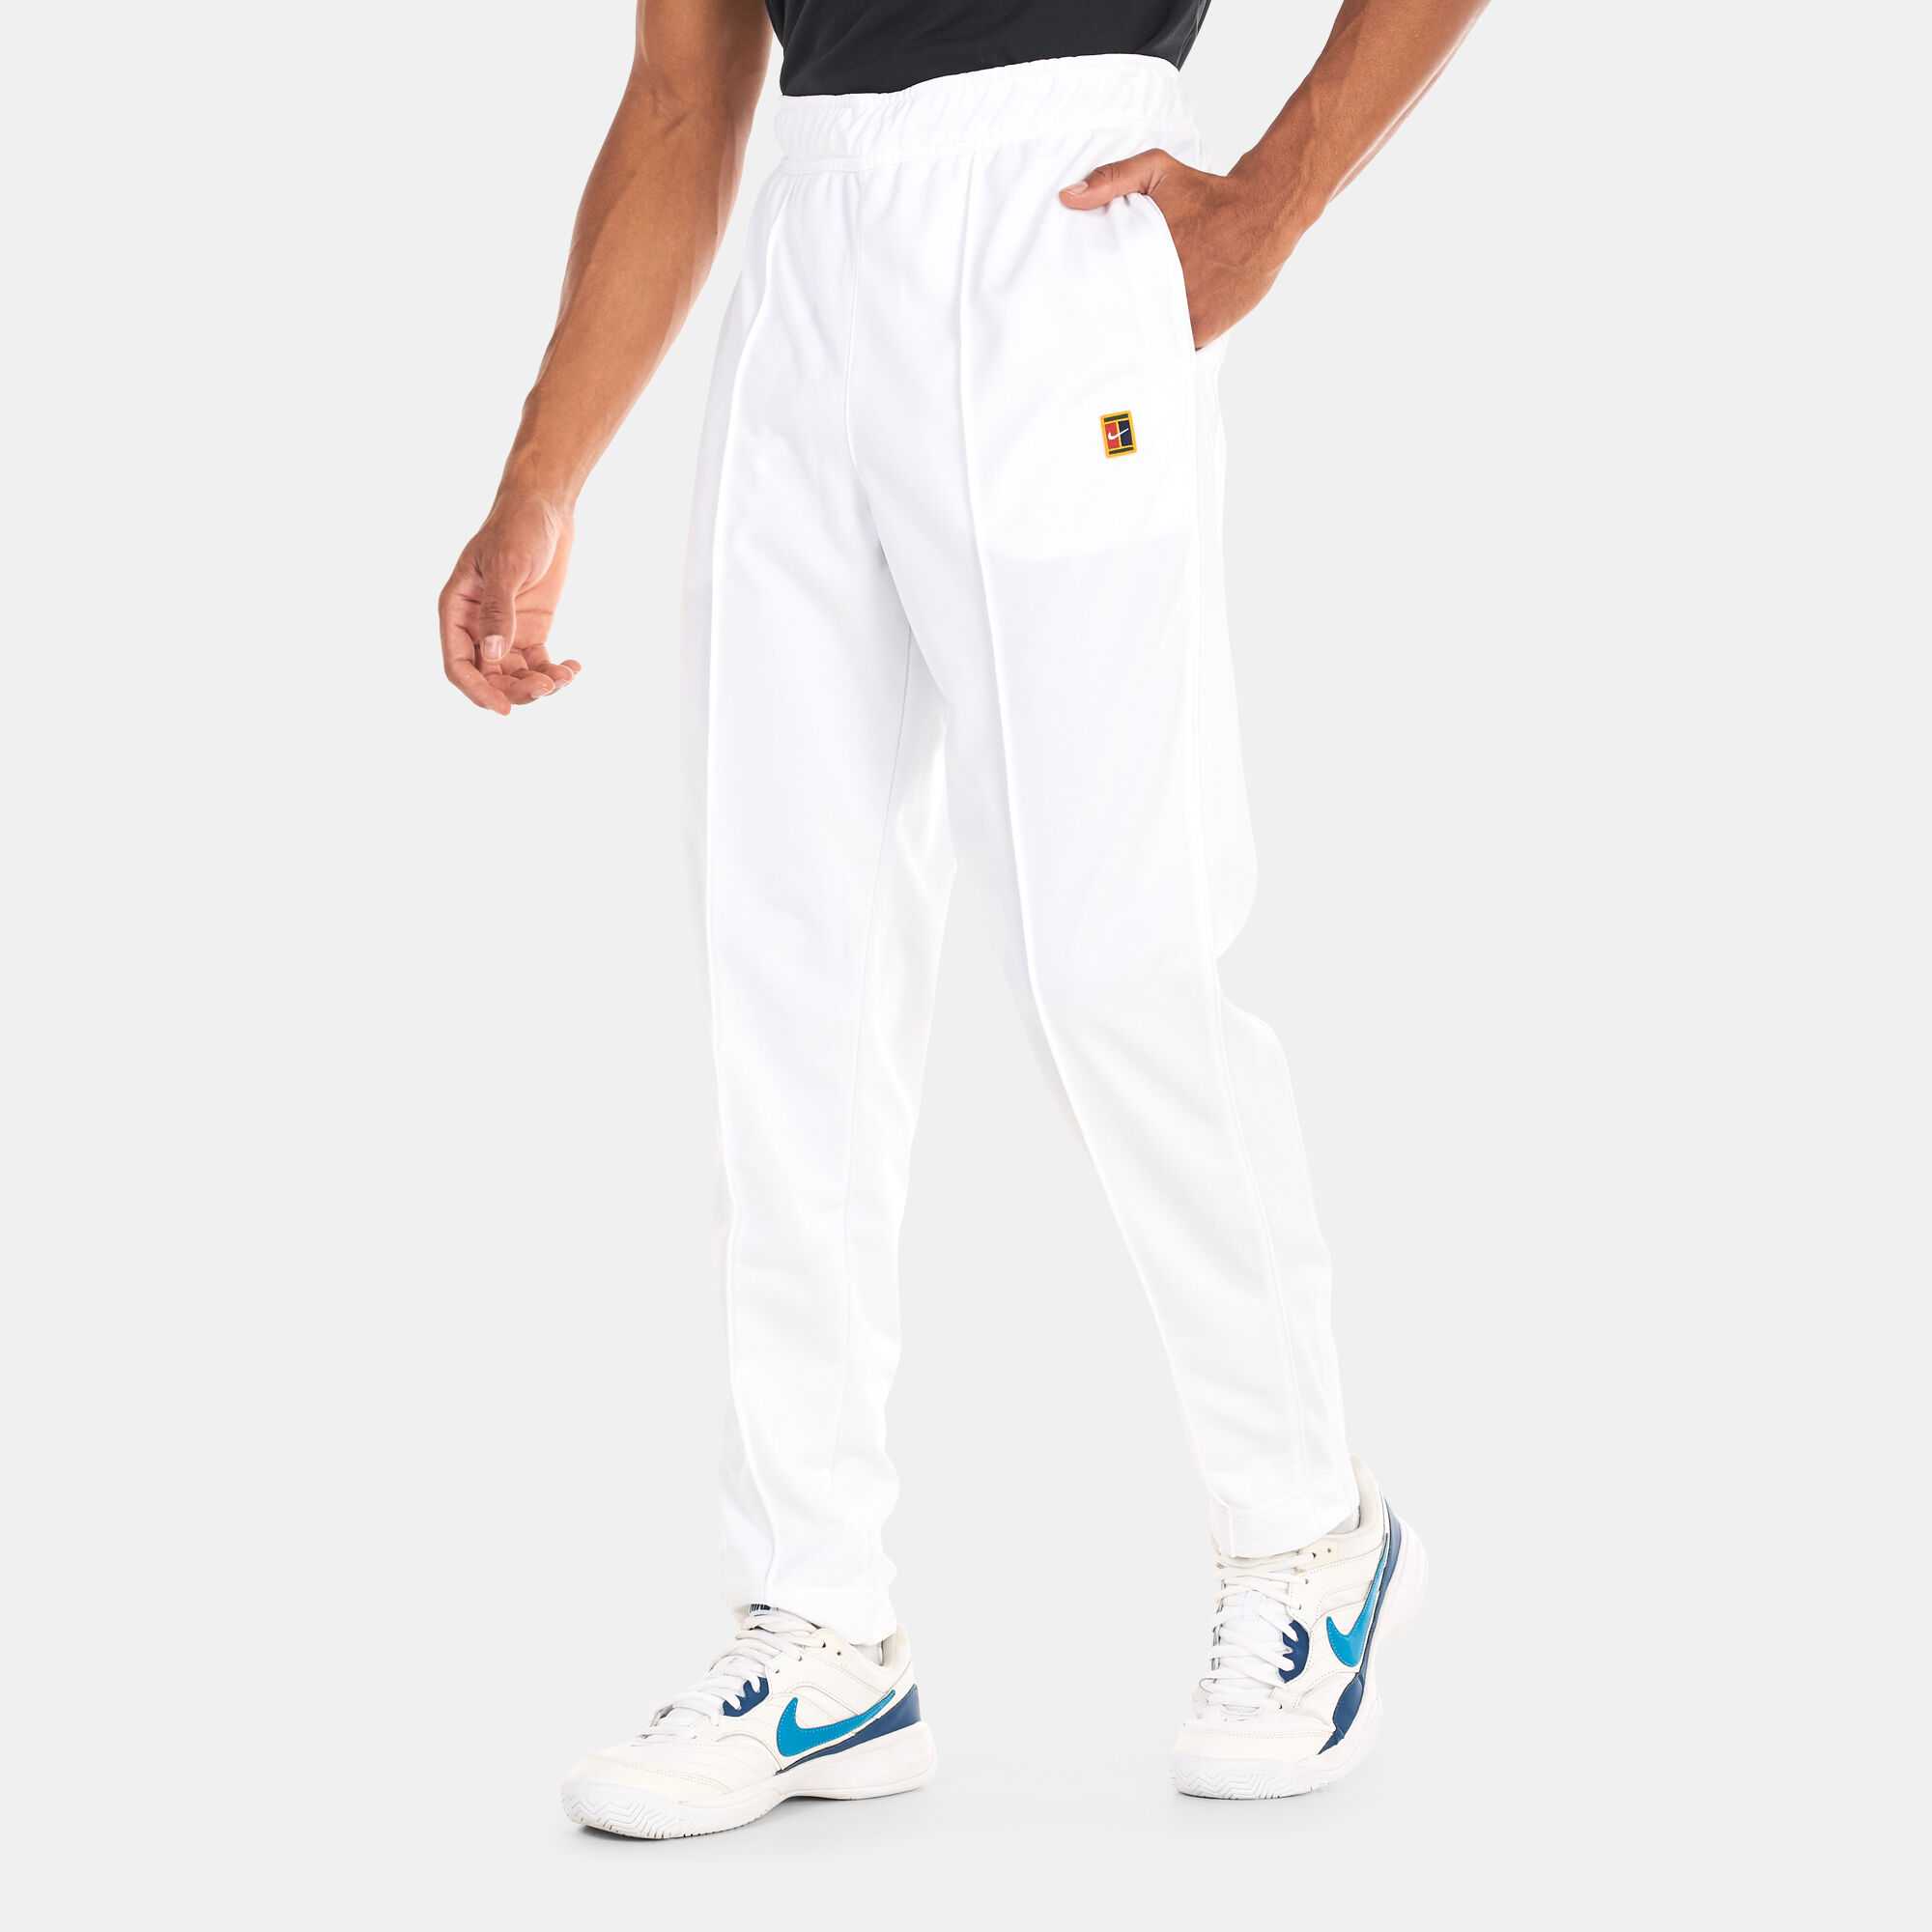 Casablanca White Damaged Piped Wool Blend Tennis Trousers Size 48 | Grailed